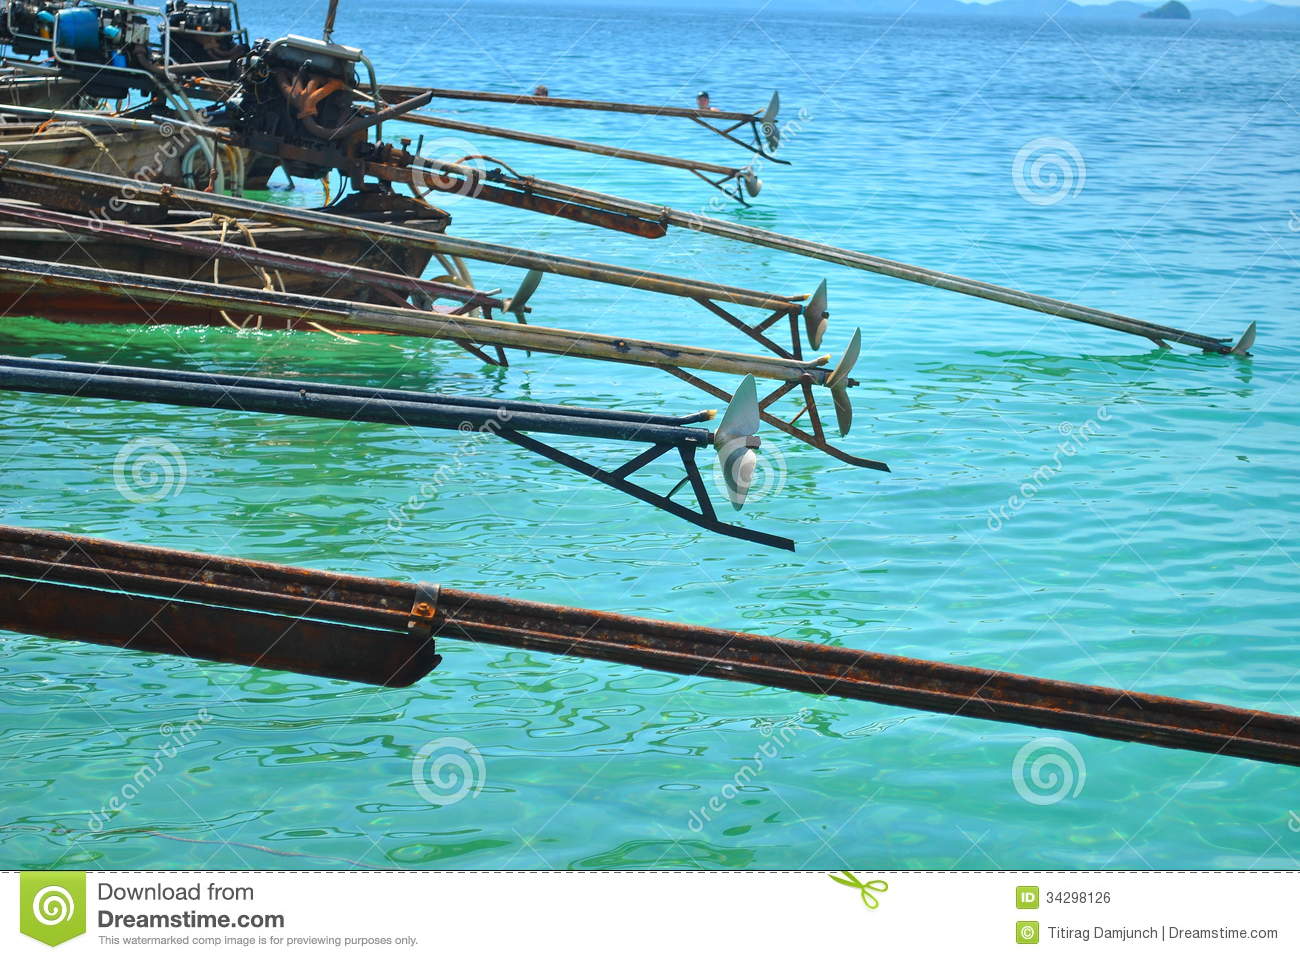 Propeller Boats Royalty Free Stock Image   Image  34298126